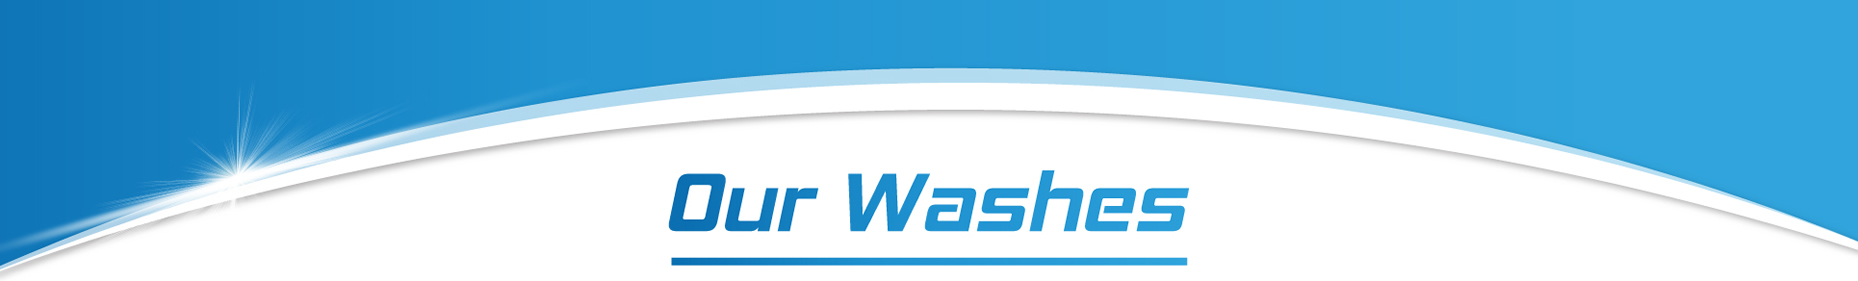 our-washes-header